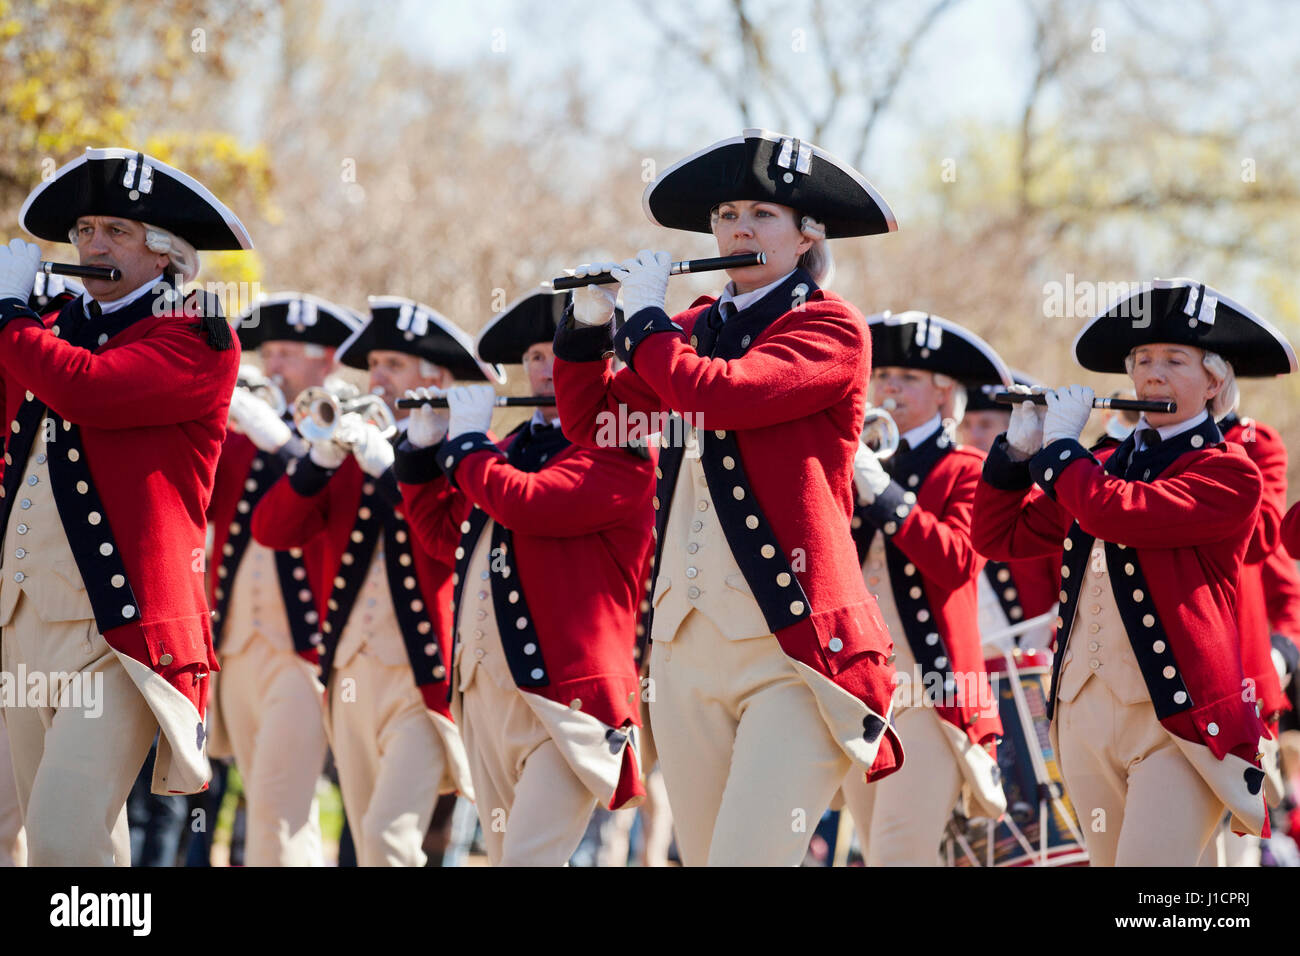 The US Army Old Guard Fife and Drum Corps at a street parade - Washington, DC USA Stock Photo